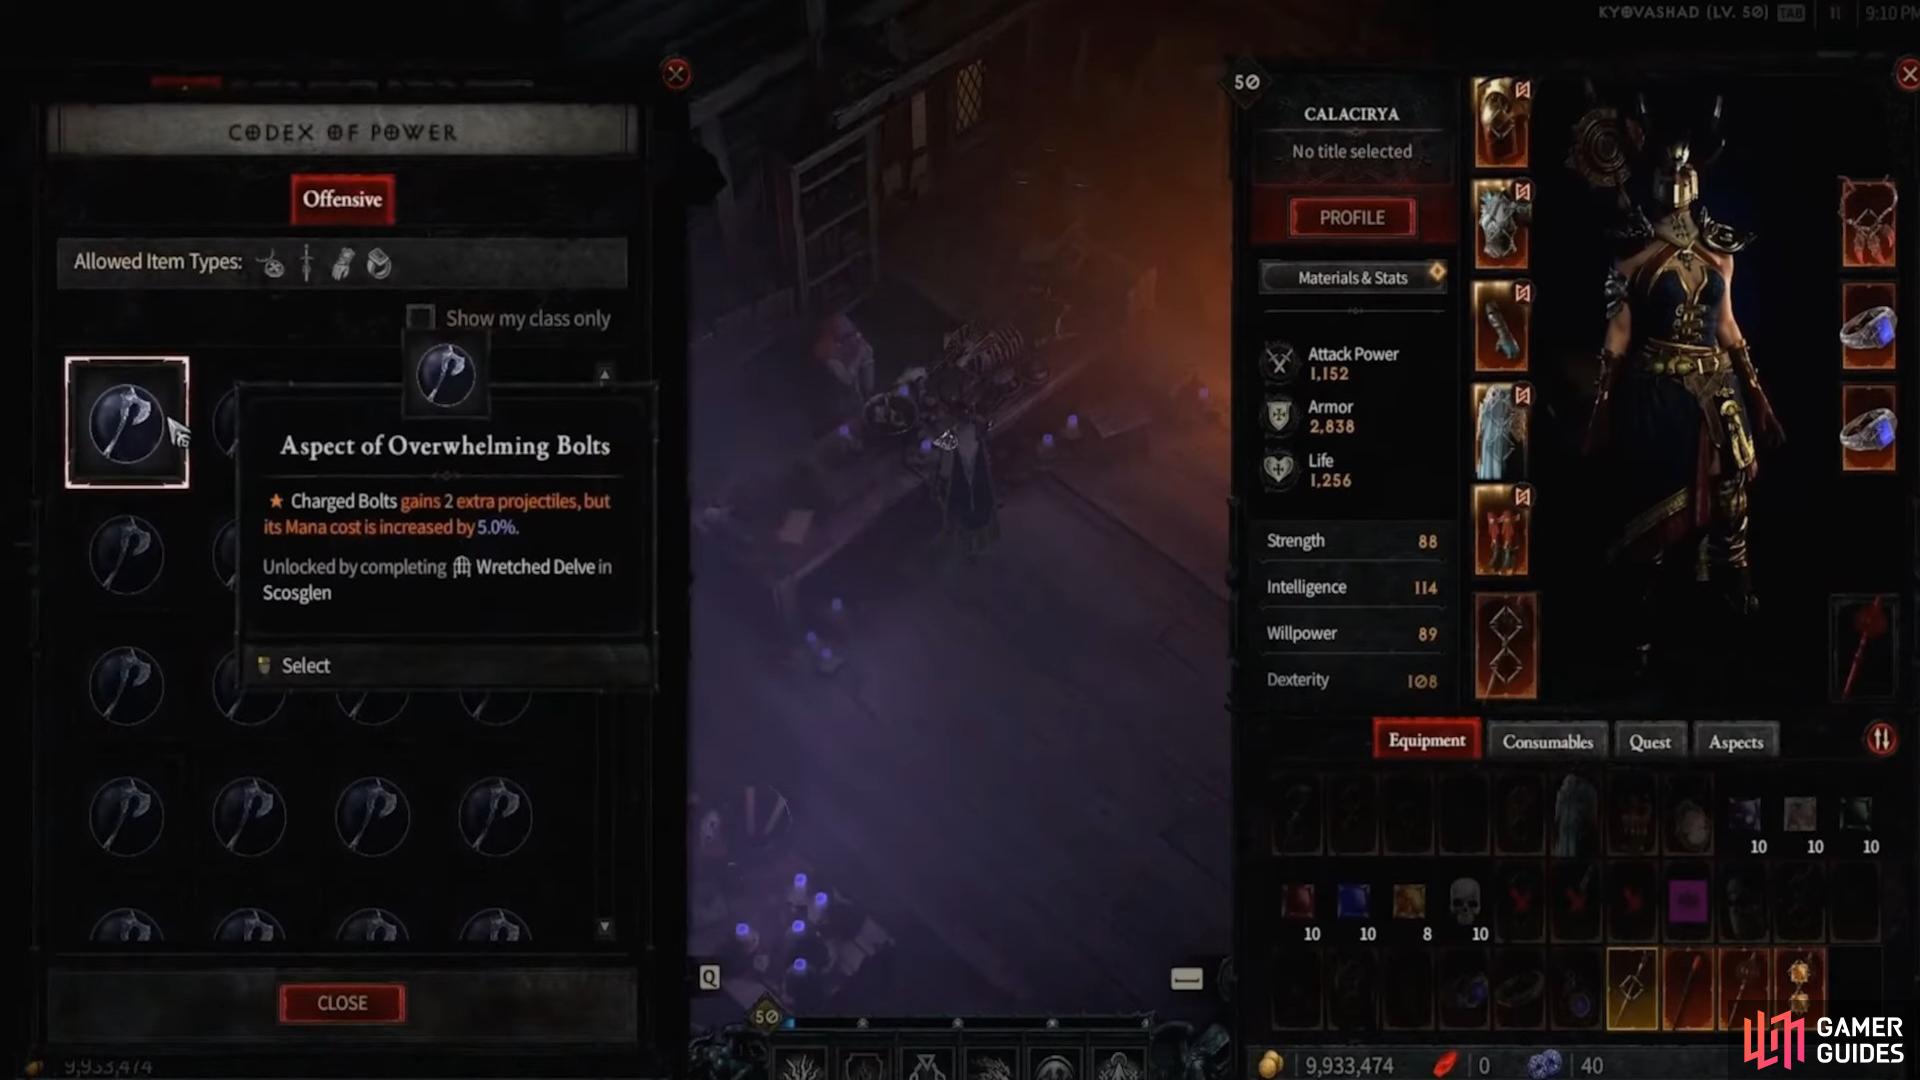 Players can visit the Occultist to modify legendary affixes using Diablo 4’s Codex of Power system. Image via Blizzard Entertainment.